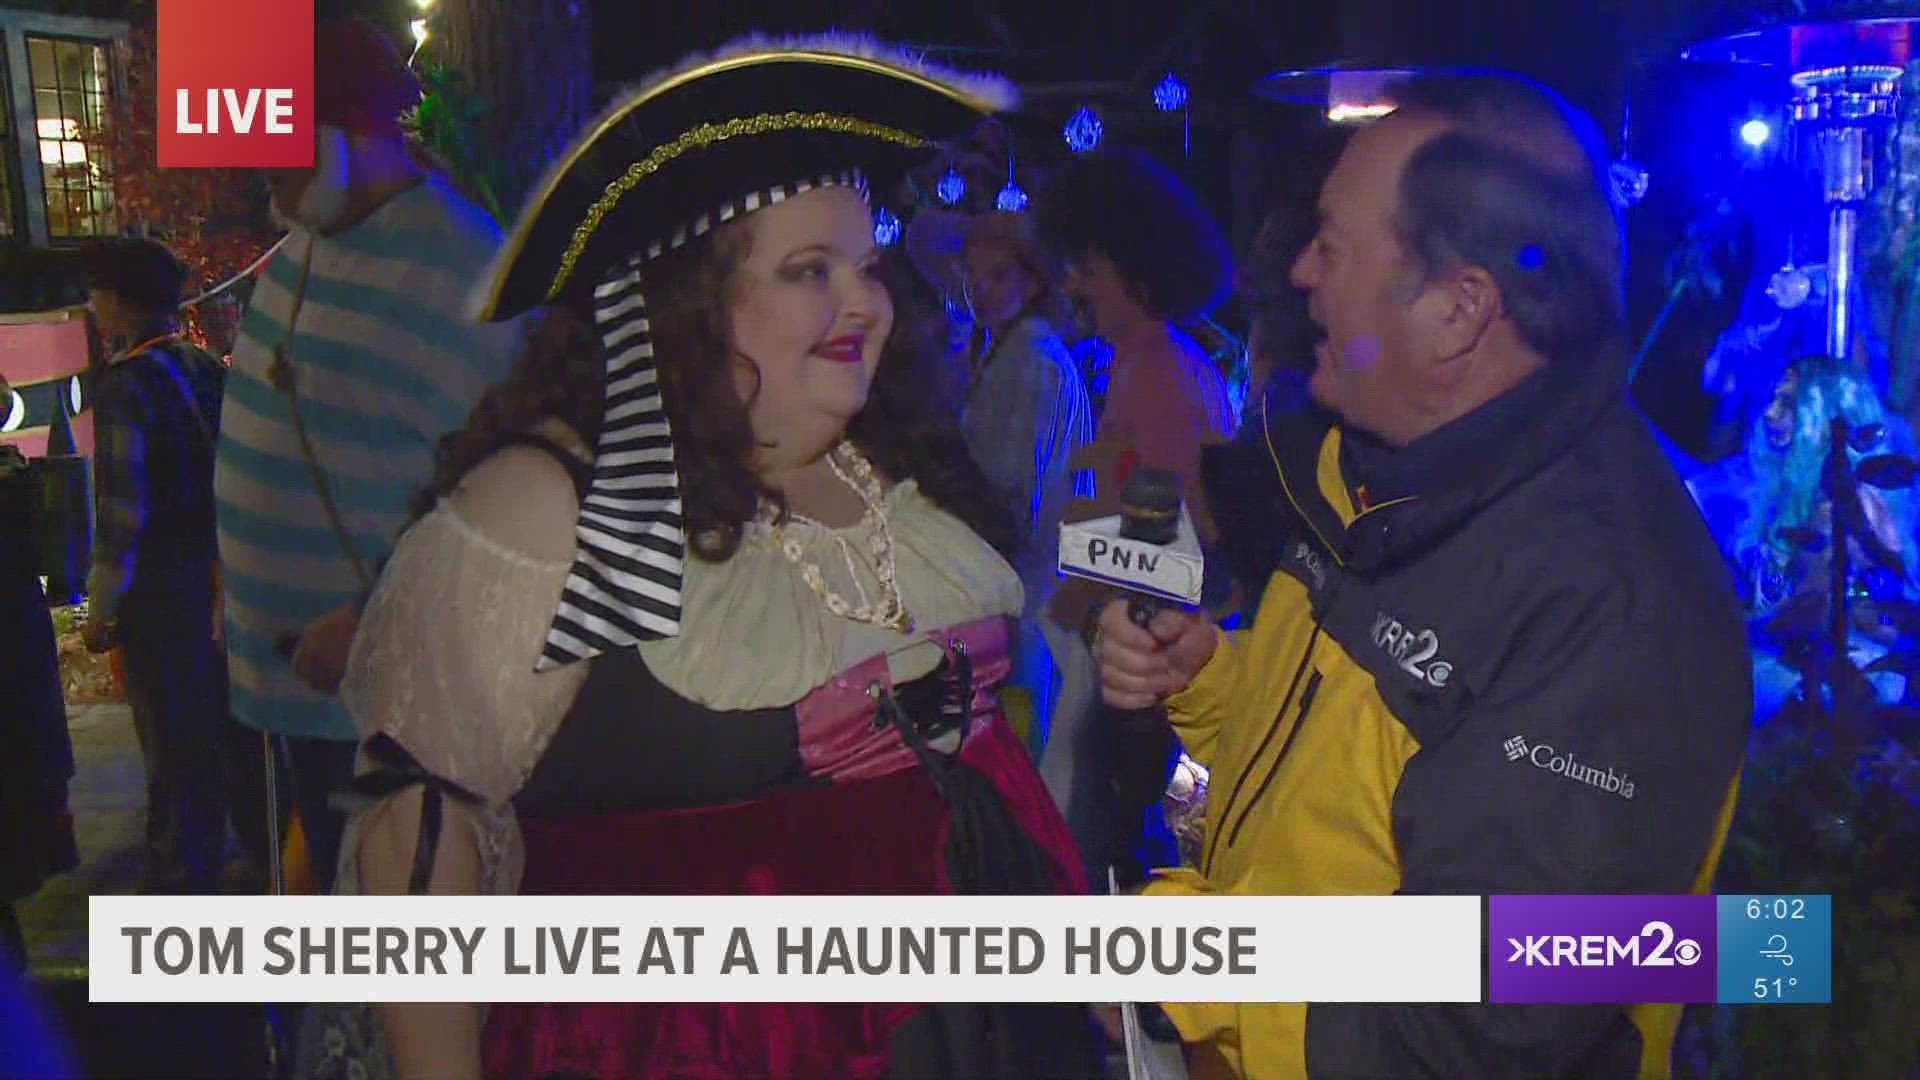 Tom Sherry talks with 'Pirate Doolittle' about the haunted house's seventh year and how Spokane residents can donate non-perishable foods for Second Harvest.